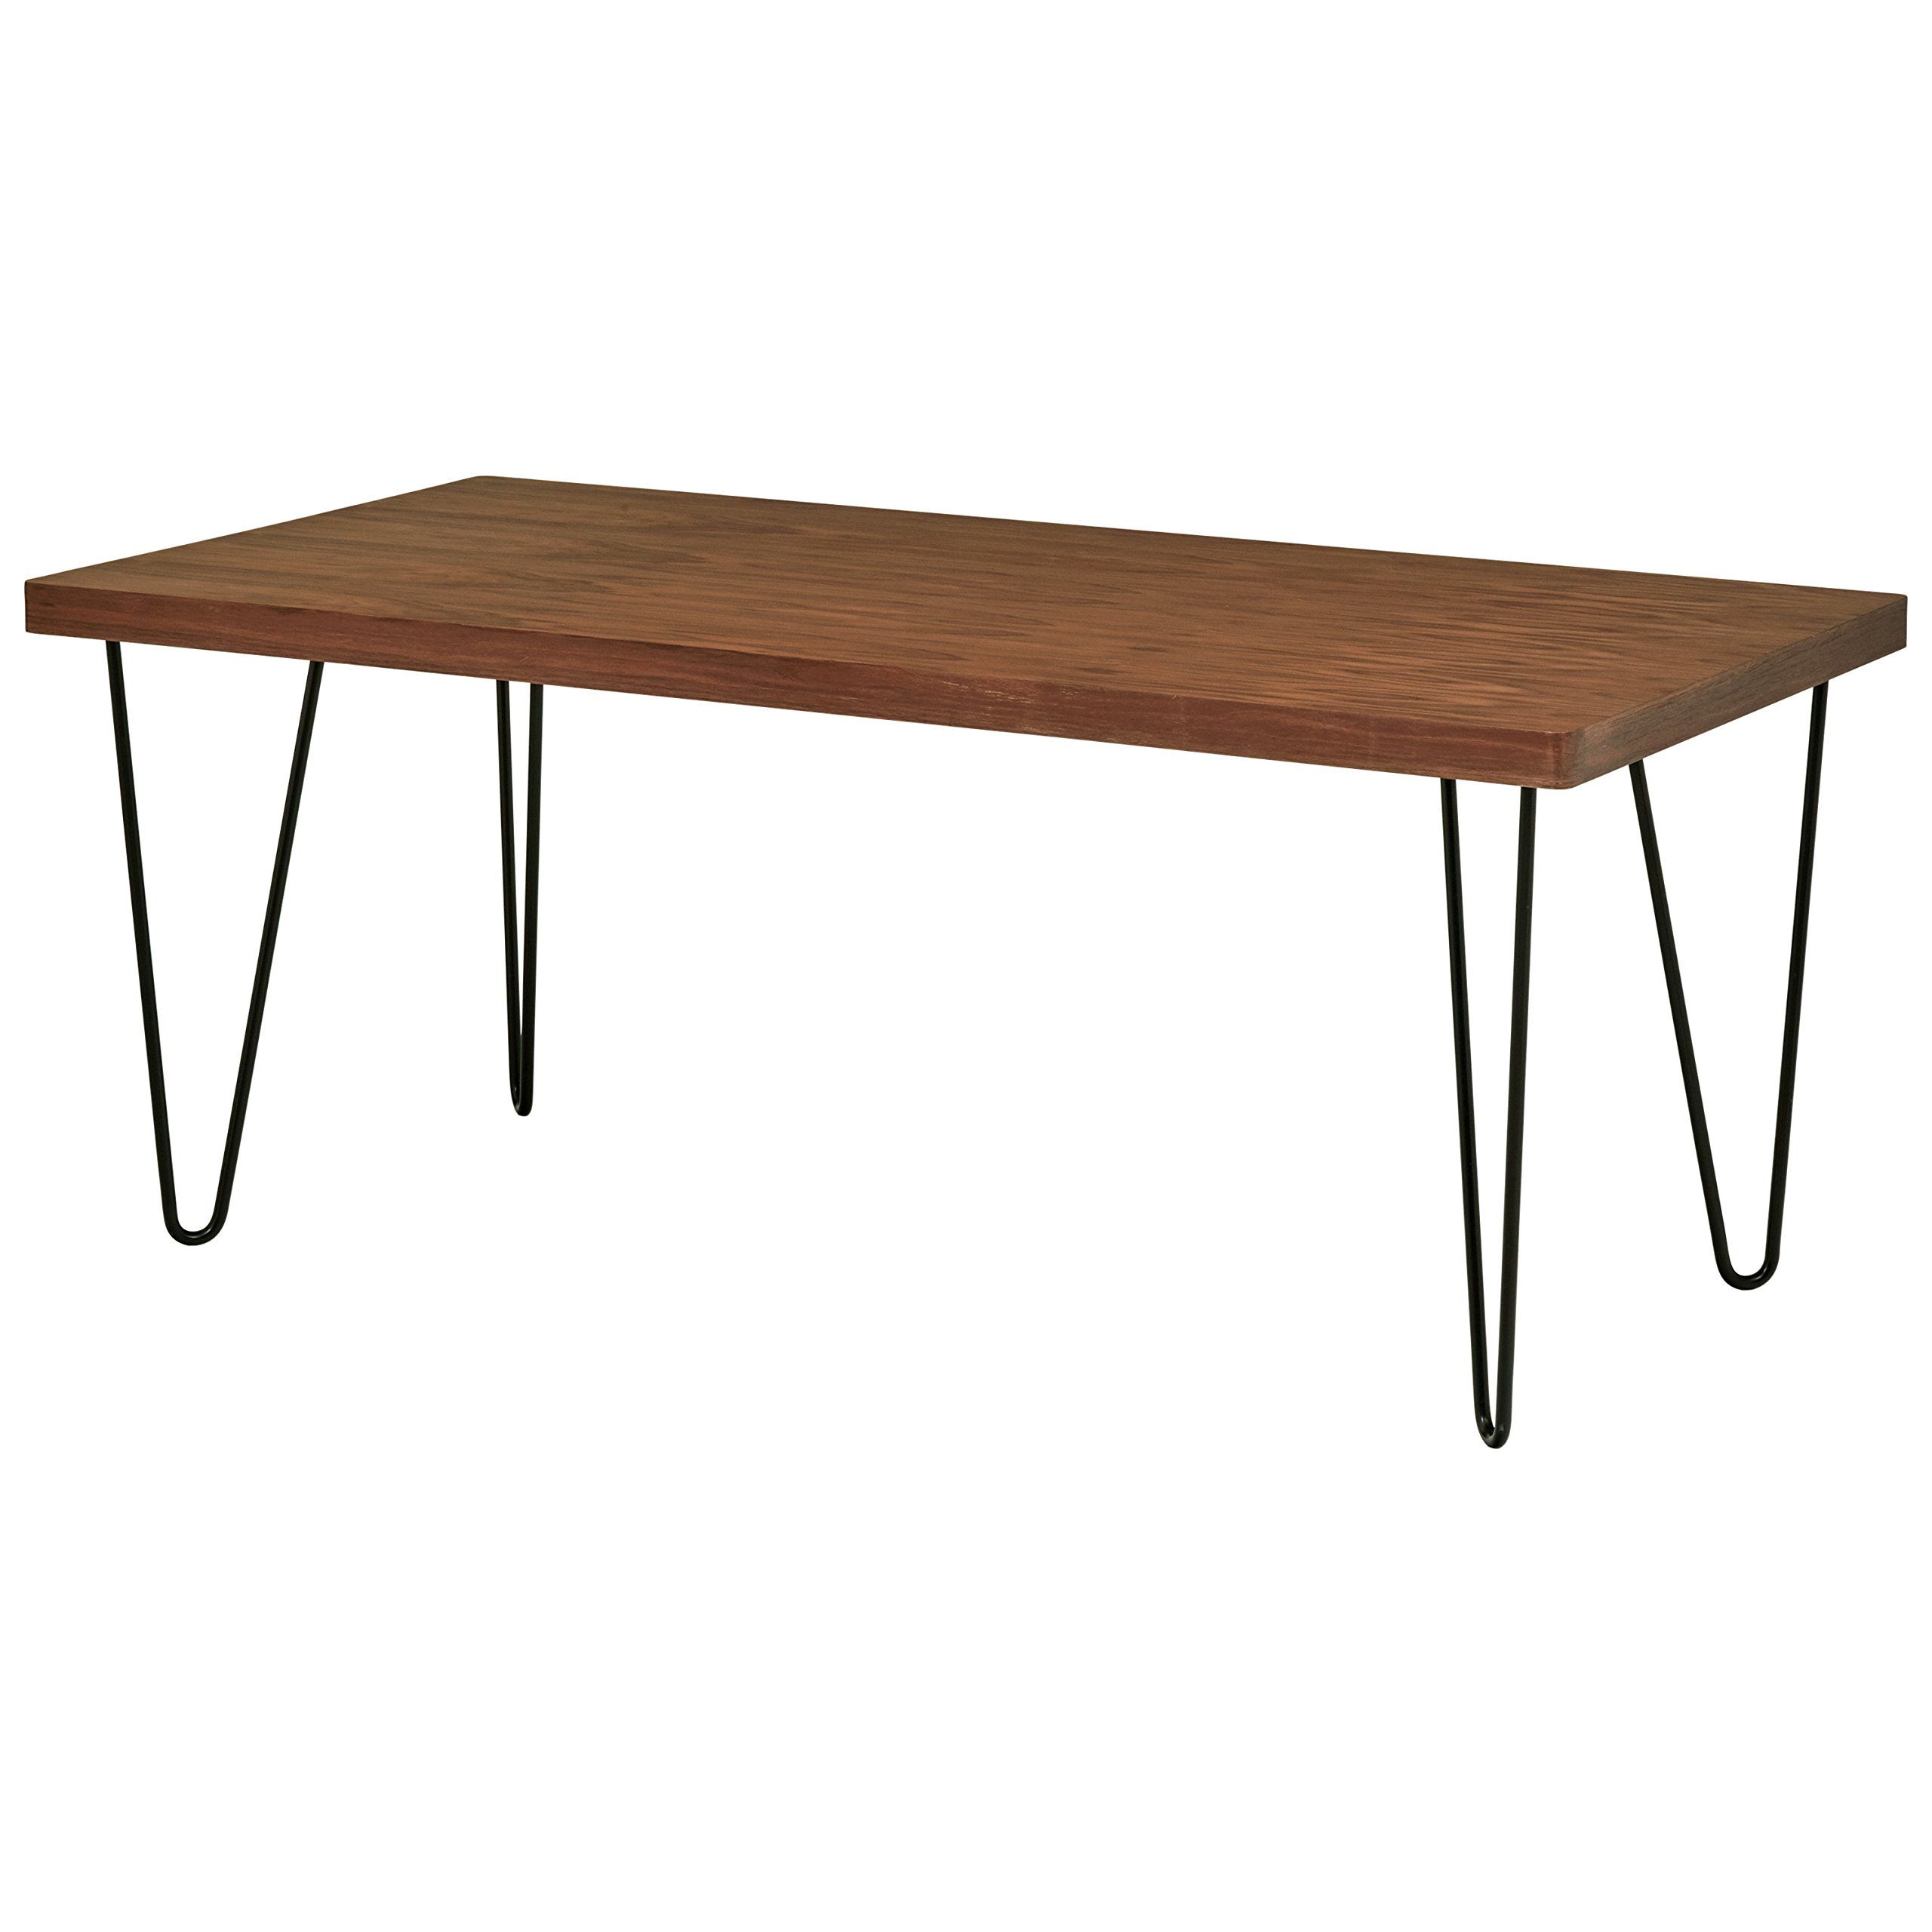 Most Recent Rivet Industrial Mid Century Modern Hairpin Dining Table Pertaining To Mid Century Rectangular Top Dining Tables With Wood Legs (View 21 of 25)